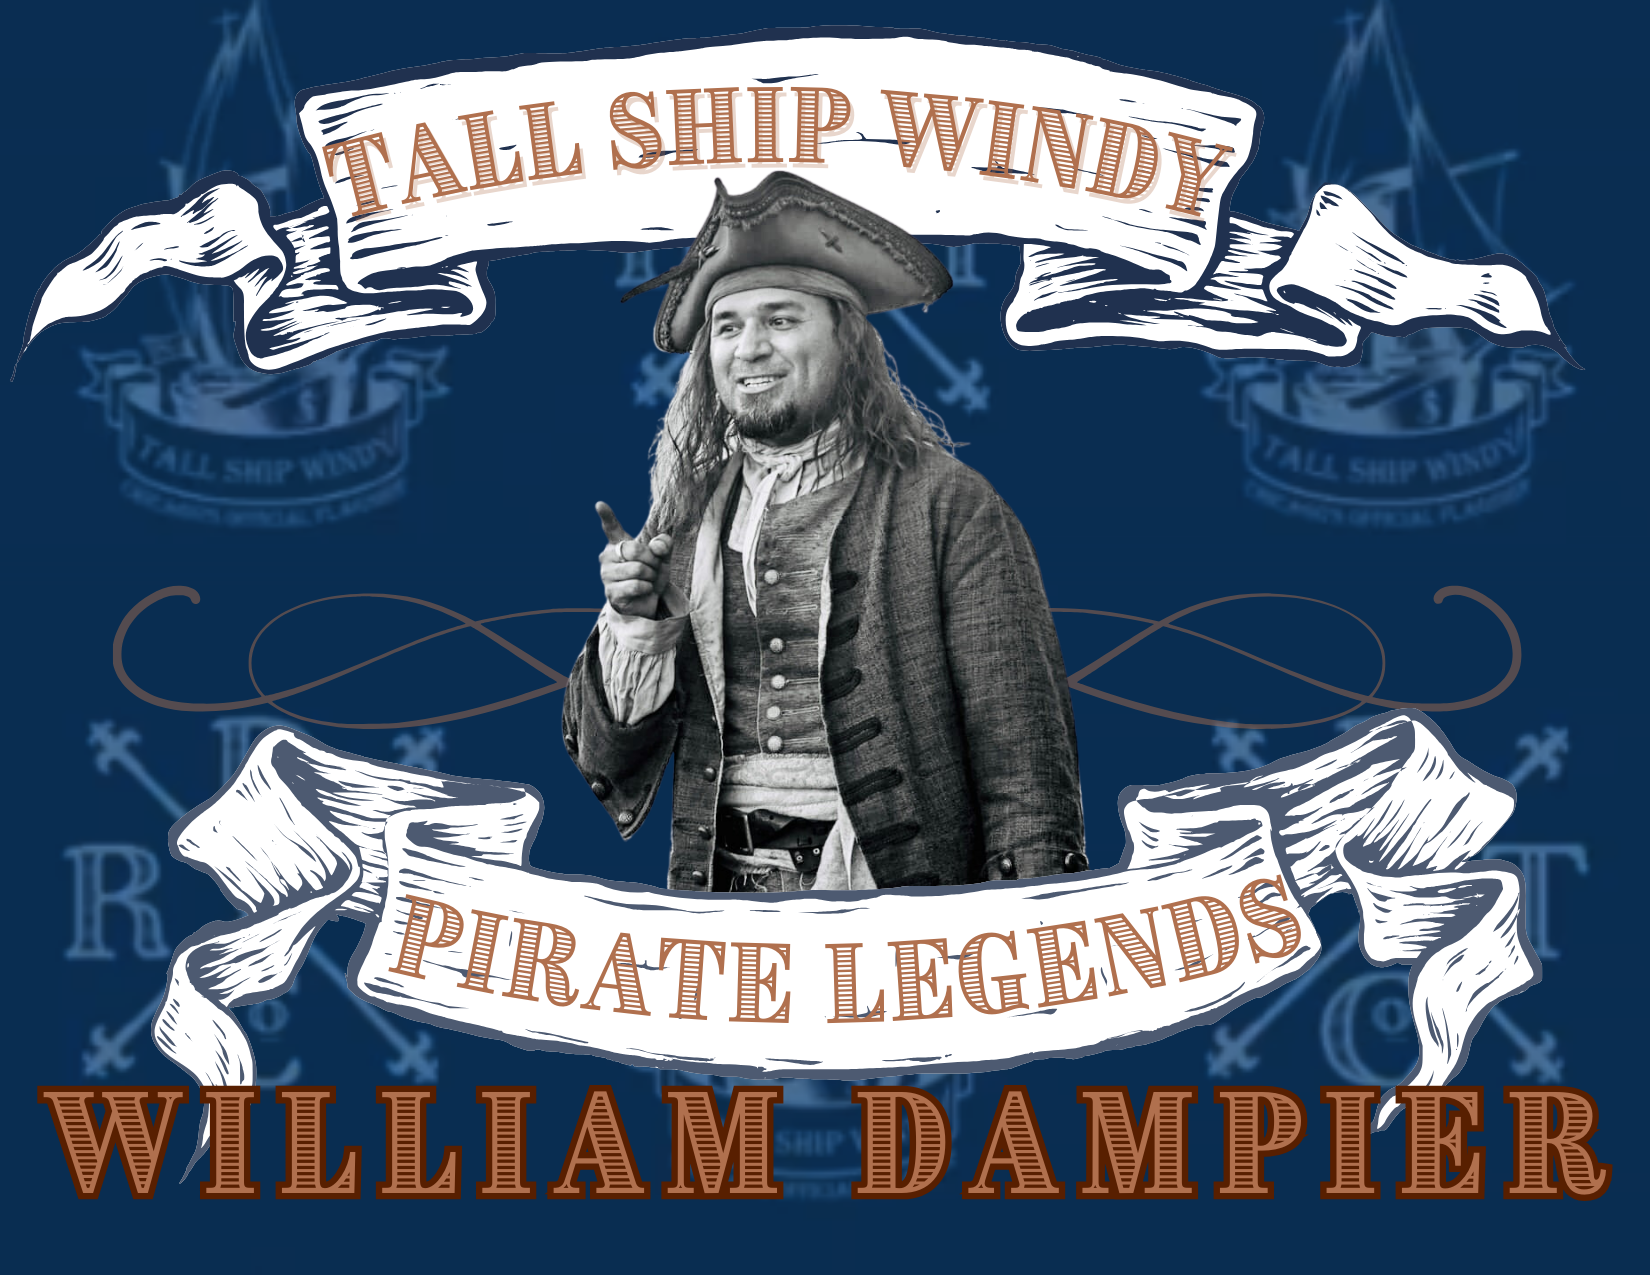 DEAD RECKONING THEATER Co. & TALL SHIP WINDY Have partnered to bring you (1)